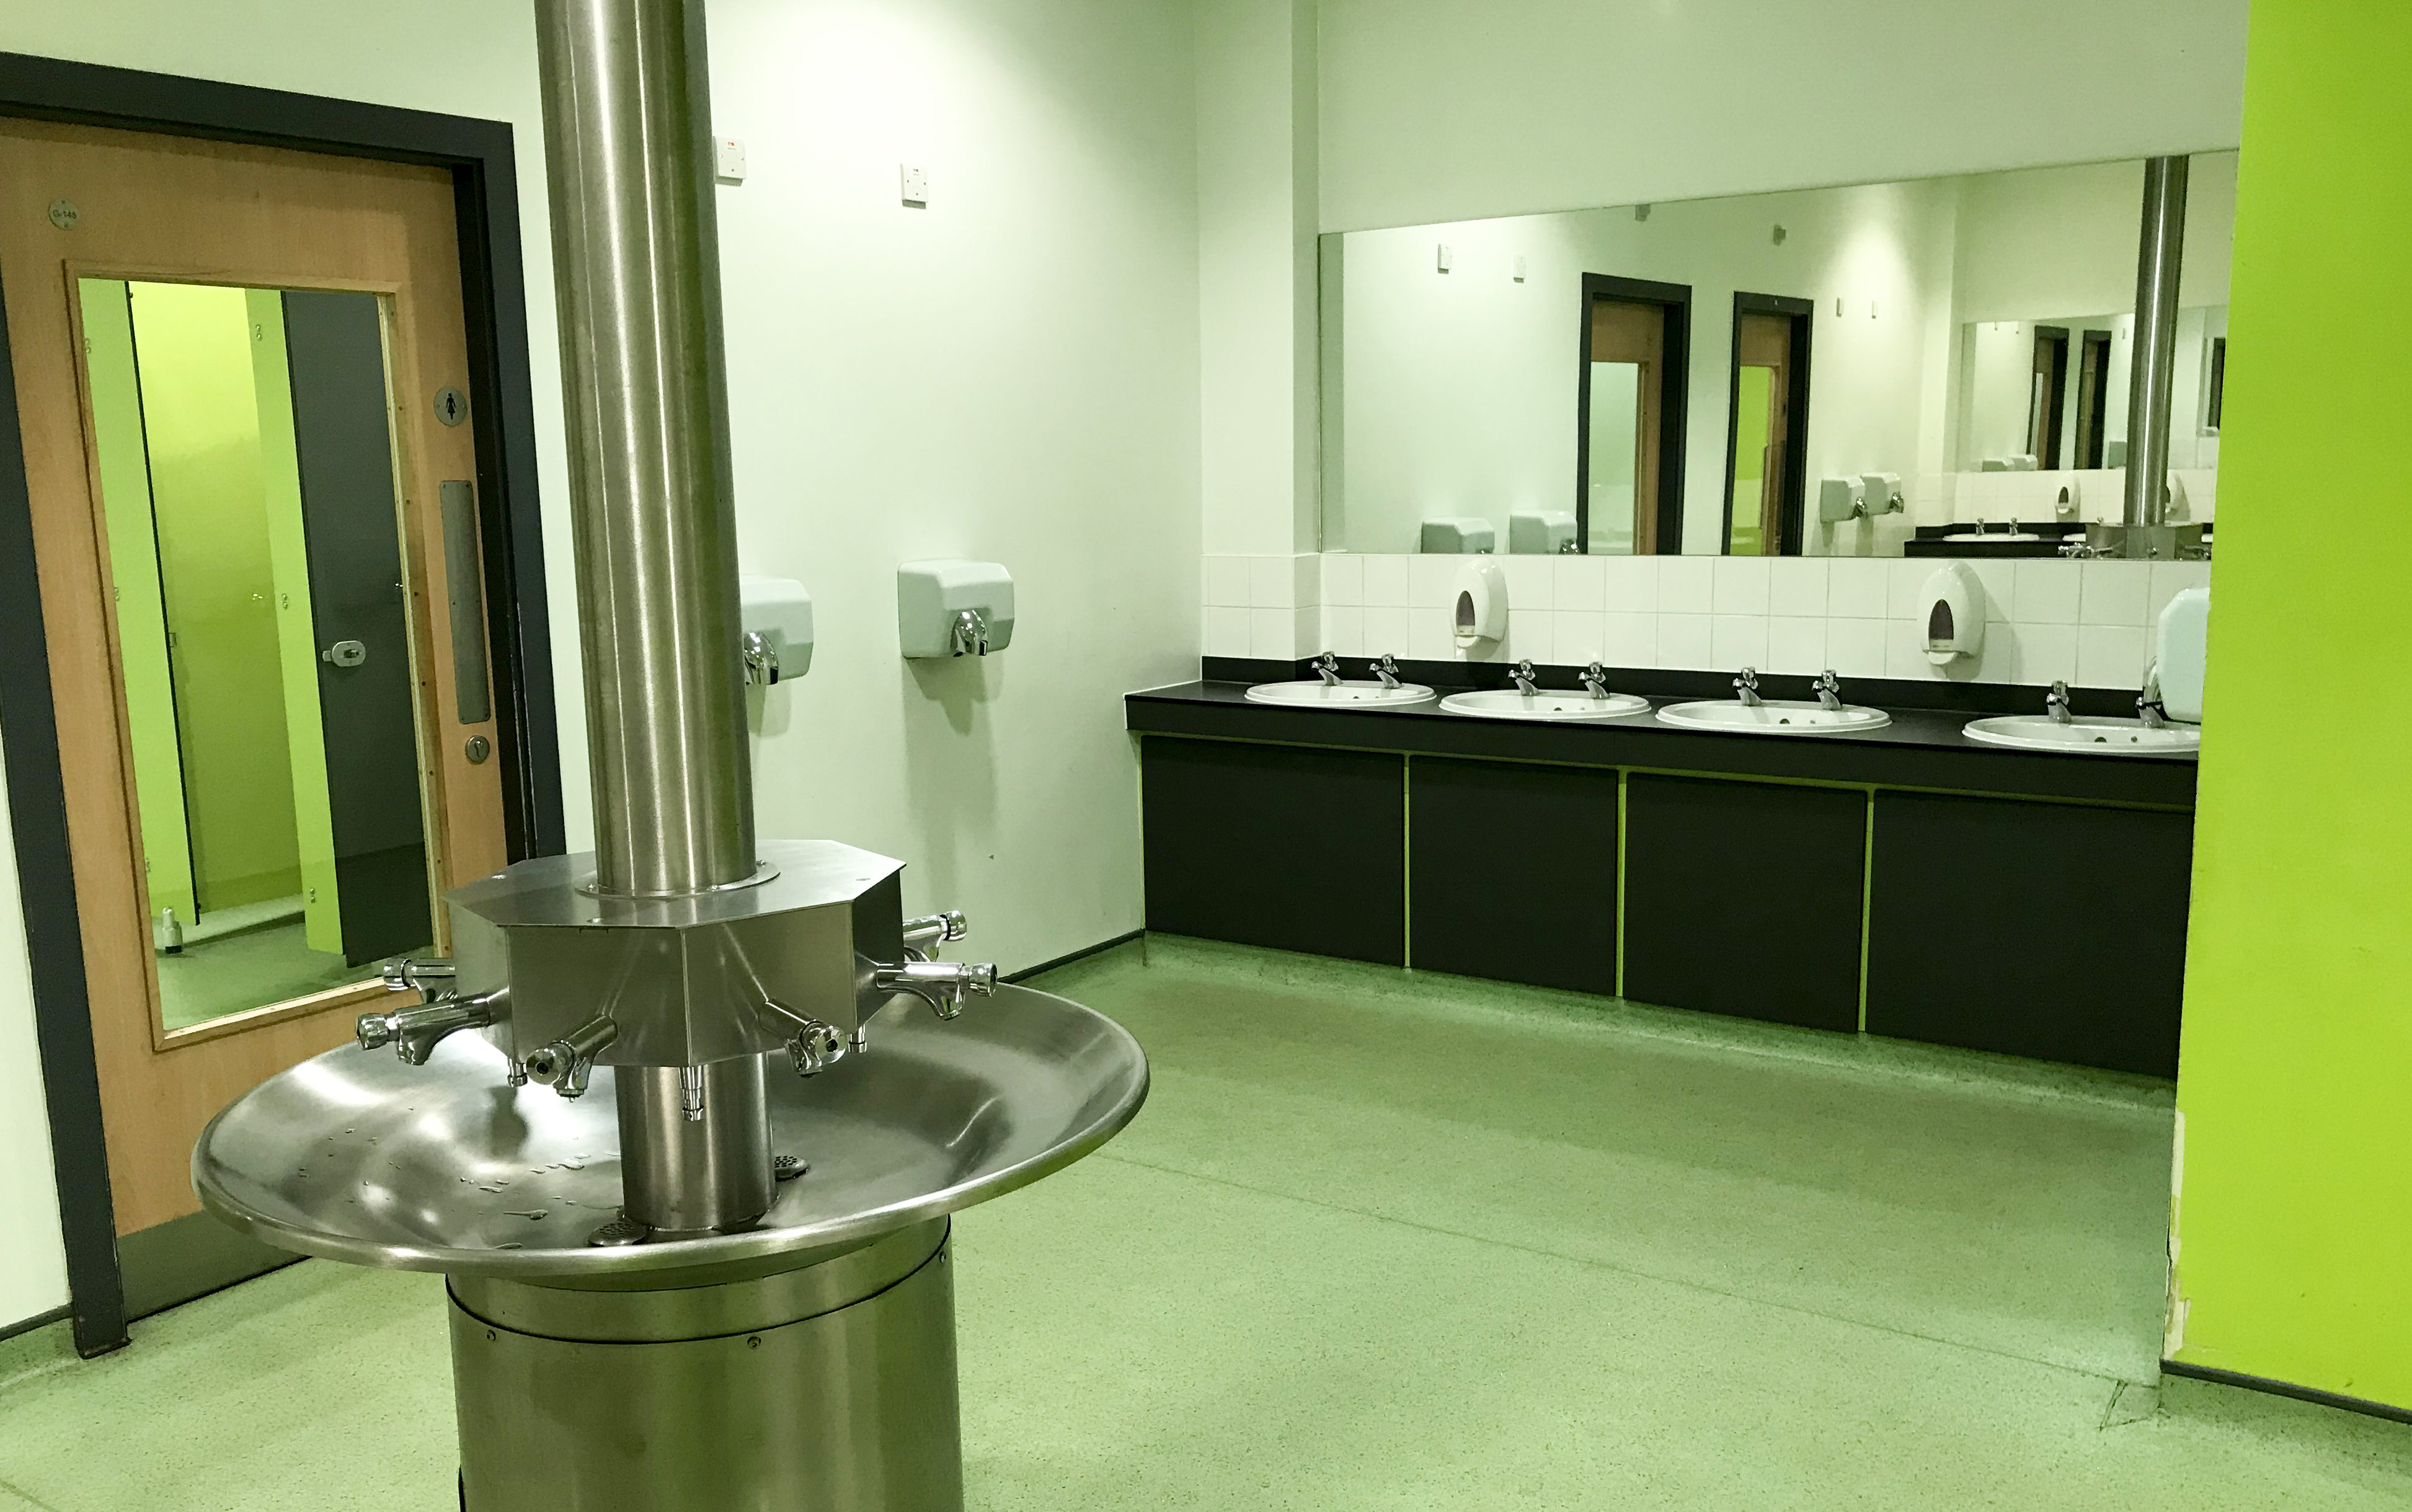 Blue water in the school toilets prompted health fears